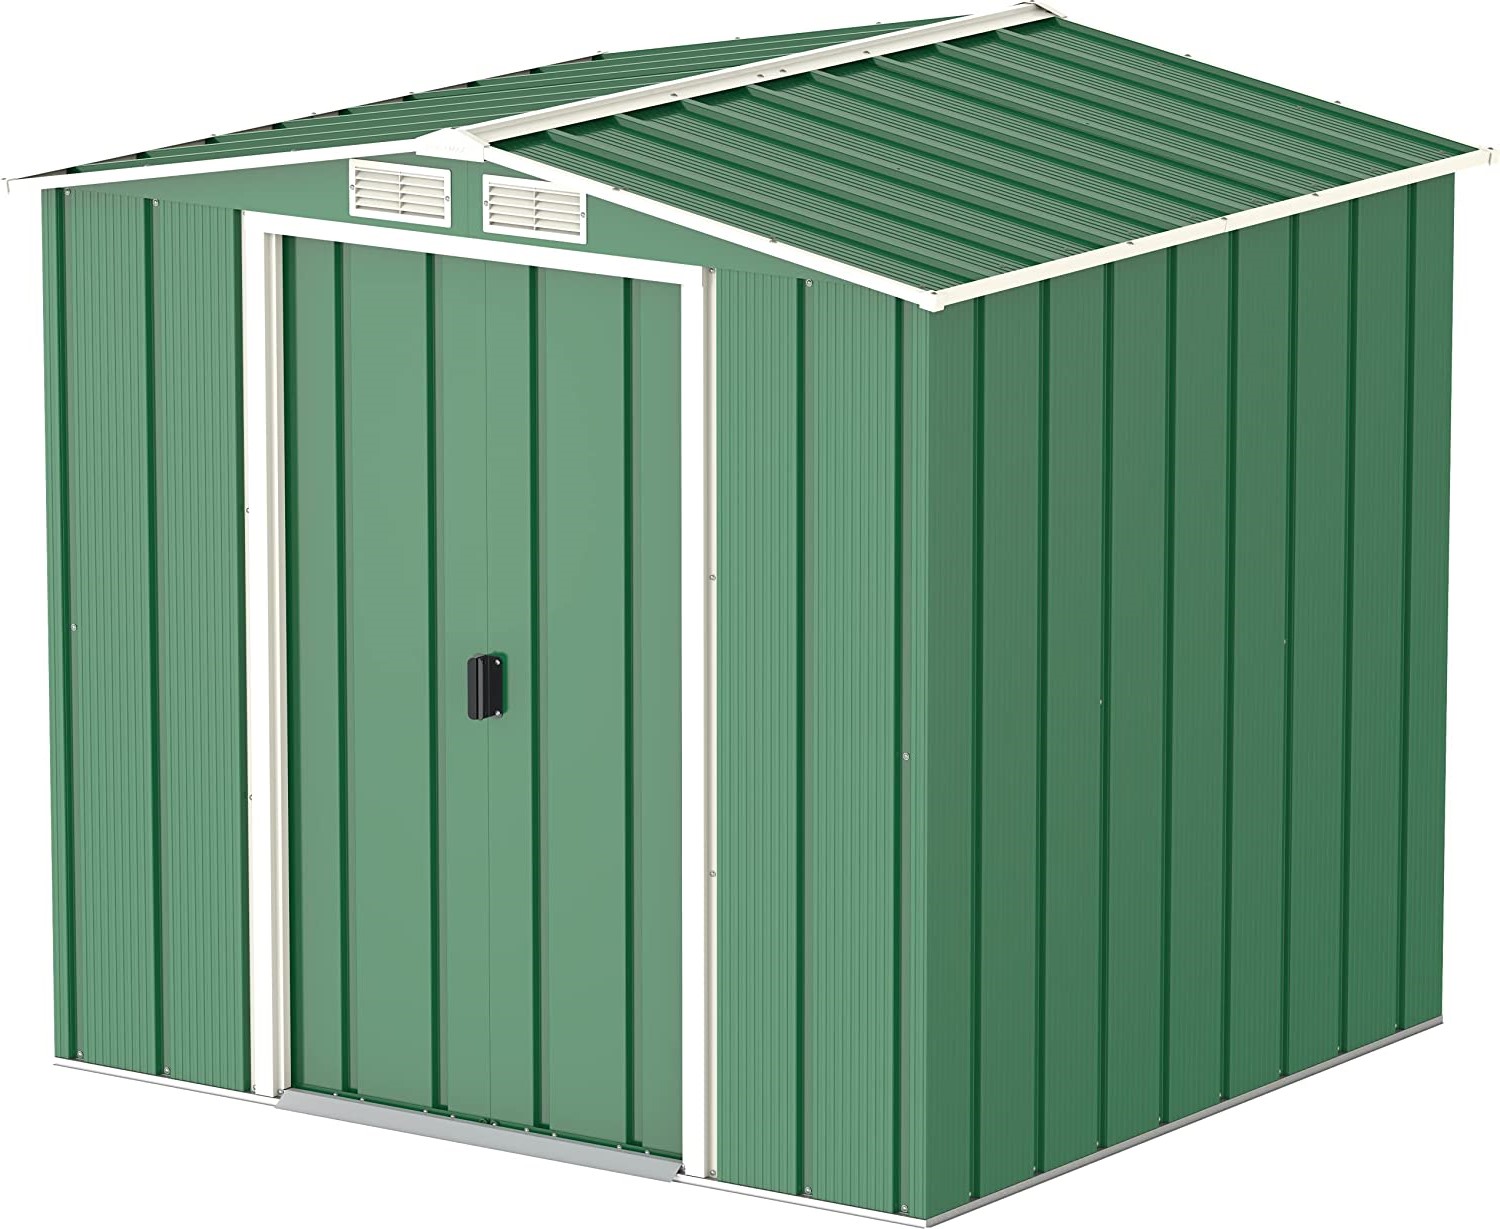  DURAMAX ECO METAL SHED 6X4FT GREEN